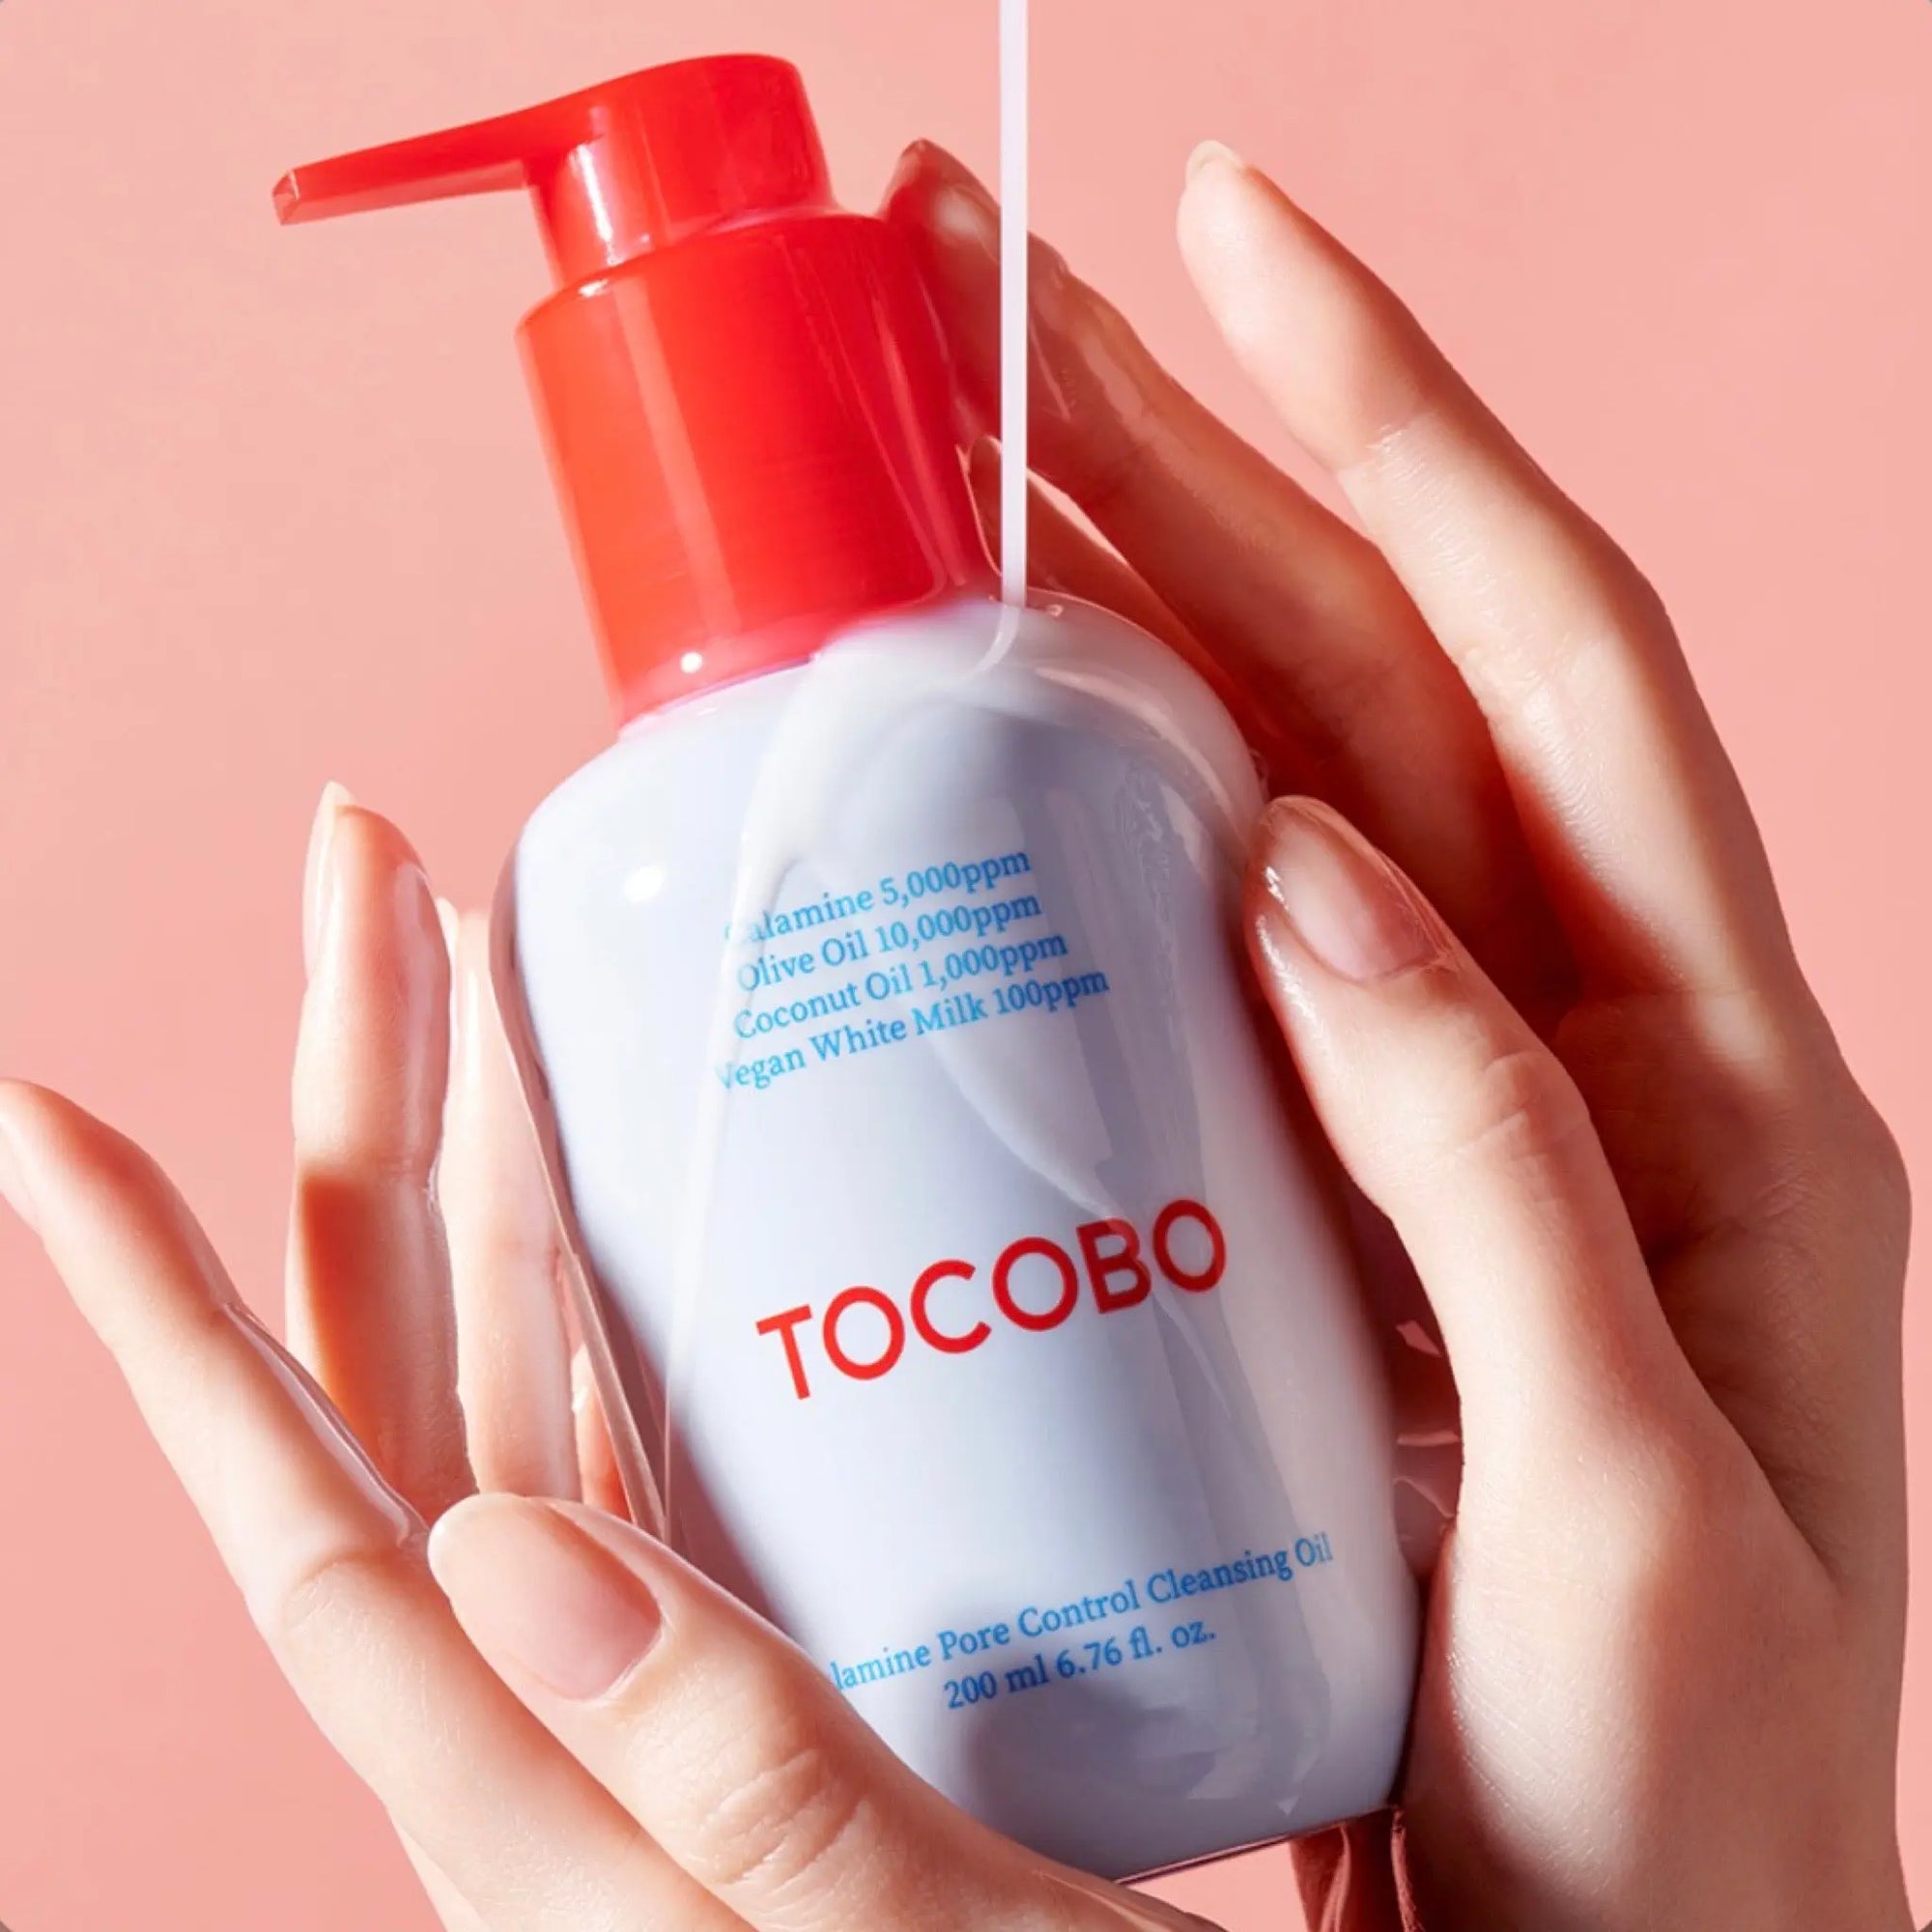 Tocobo - Calamine pore Control Cleansing Oil 200mL Tocobo